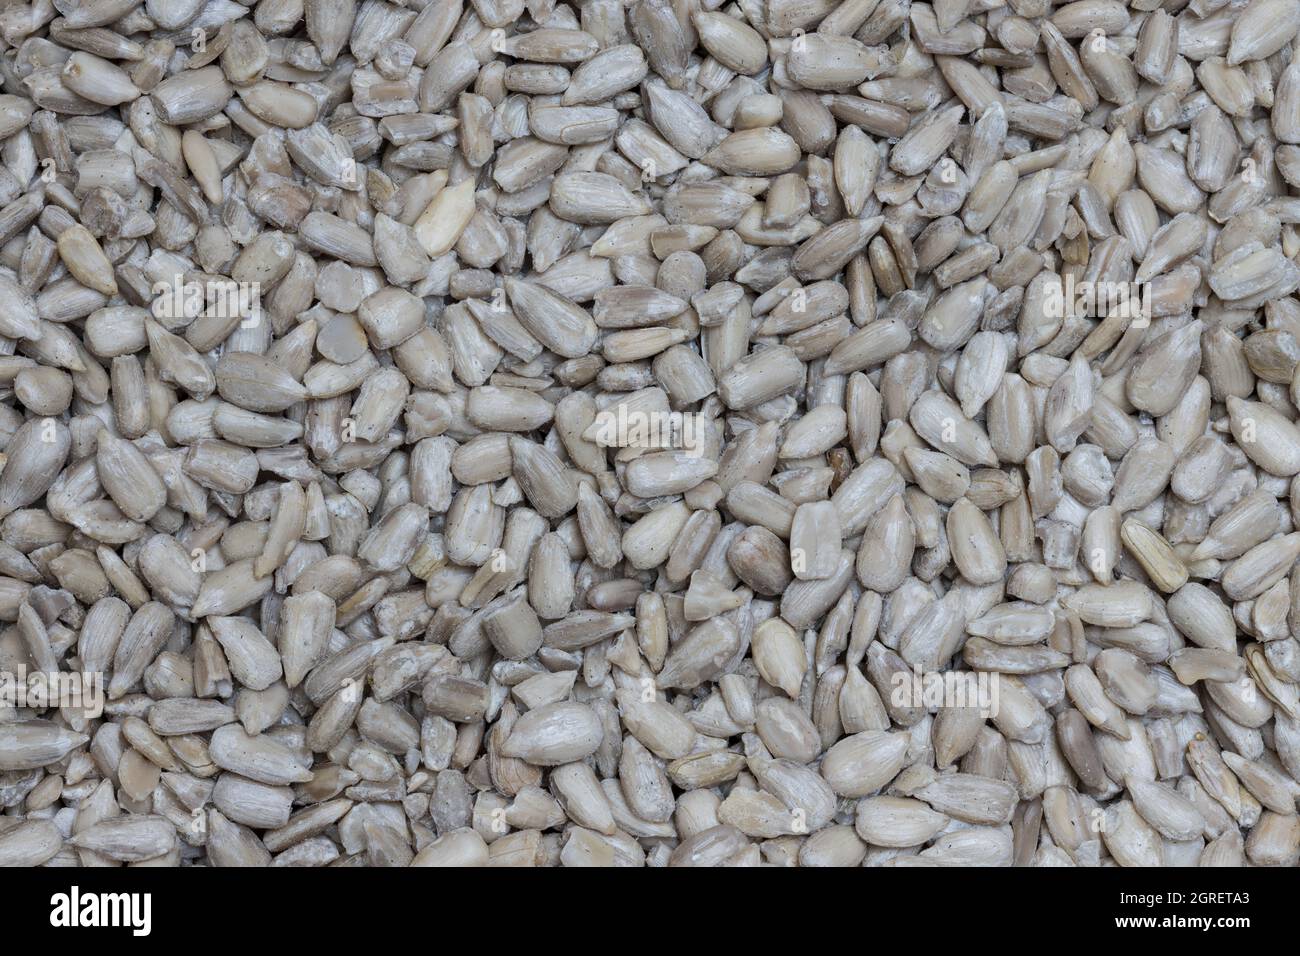 Sunflower seeds close up detail. Stock Photo